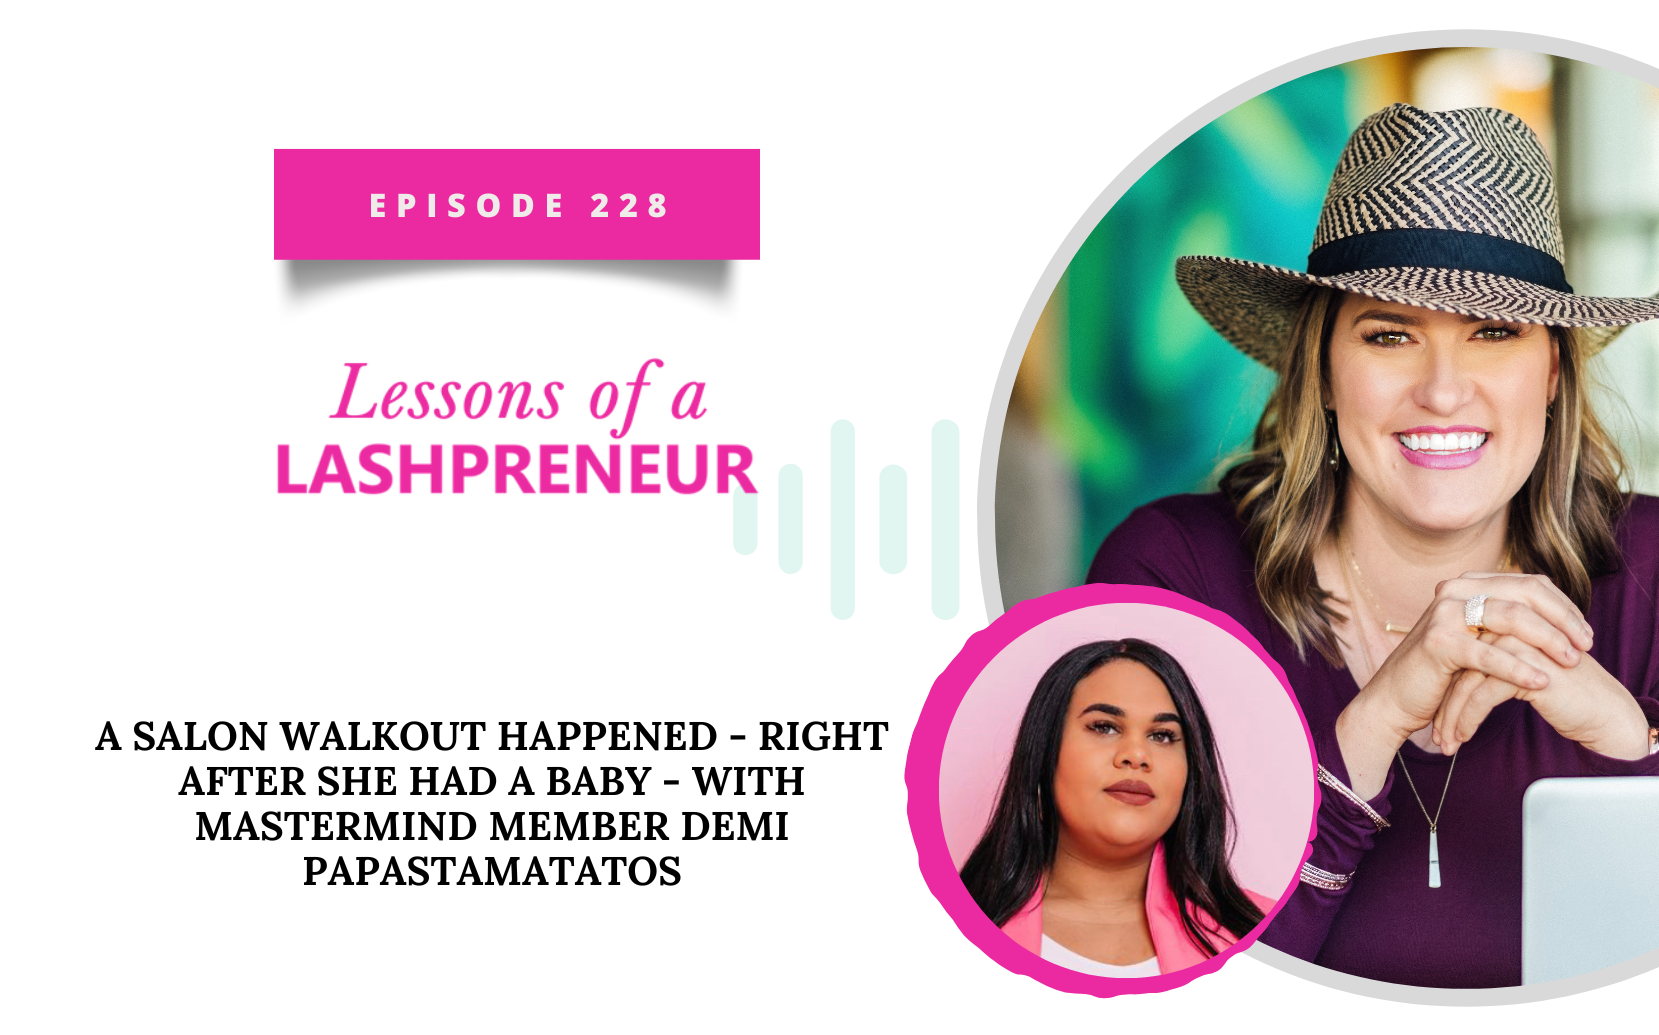 A Salon Walkout Happened – Right After She had a Baby – with Mastermind Member Demi Papastamatatos